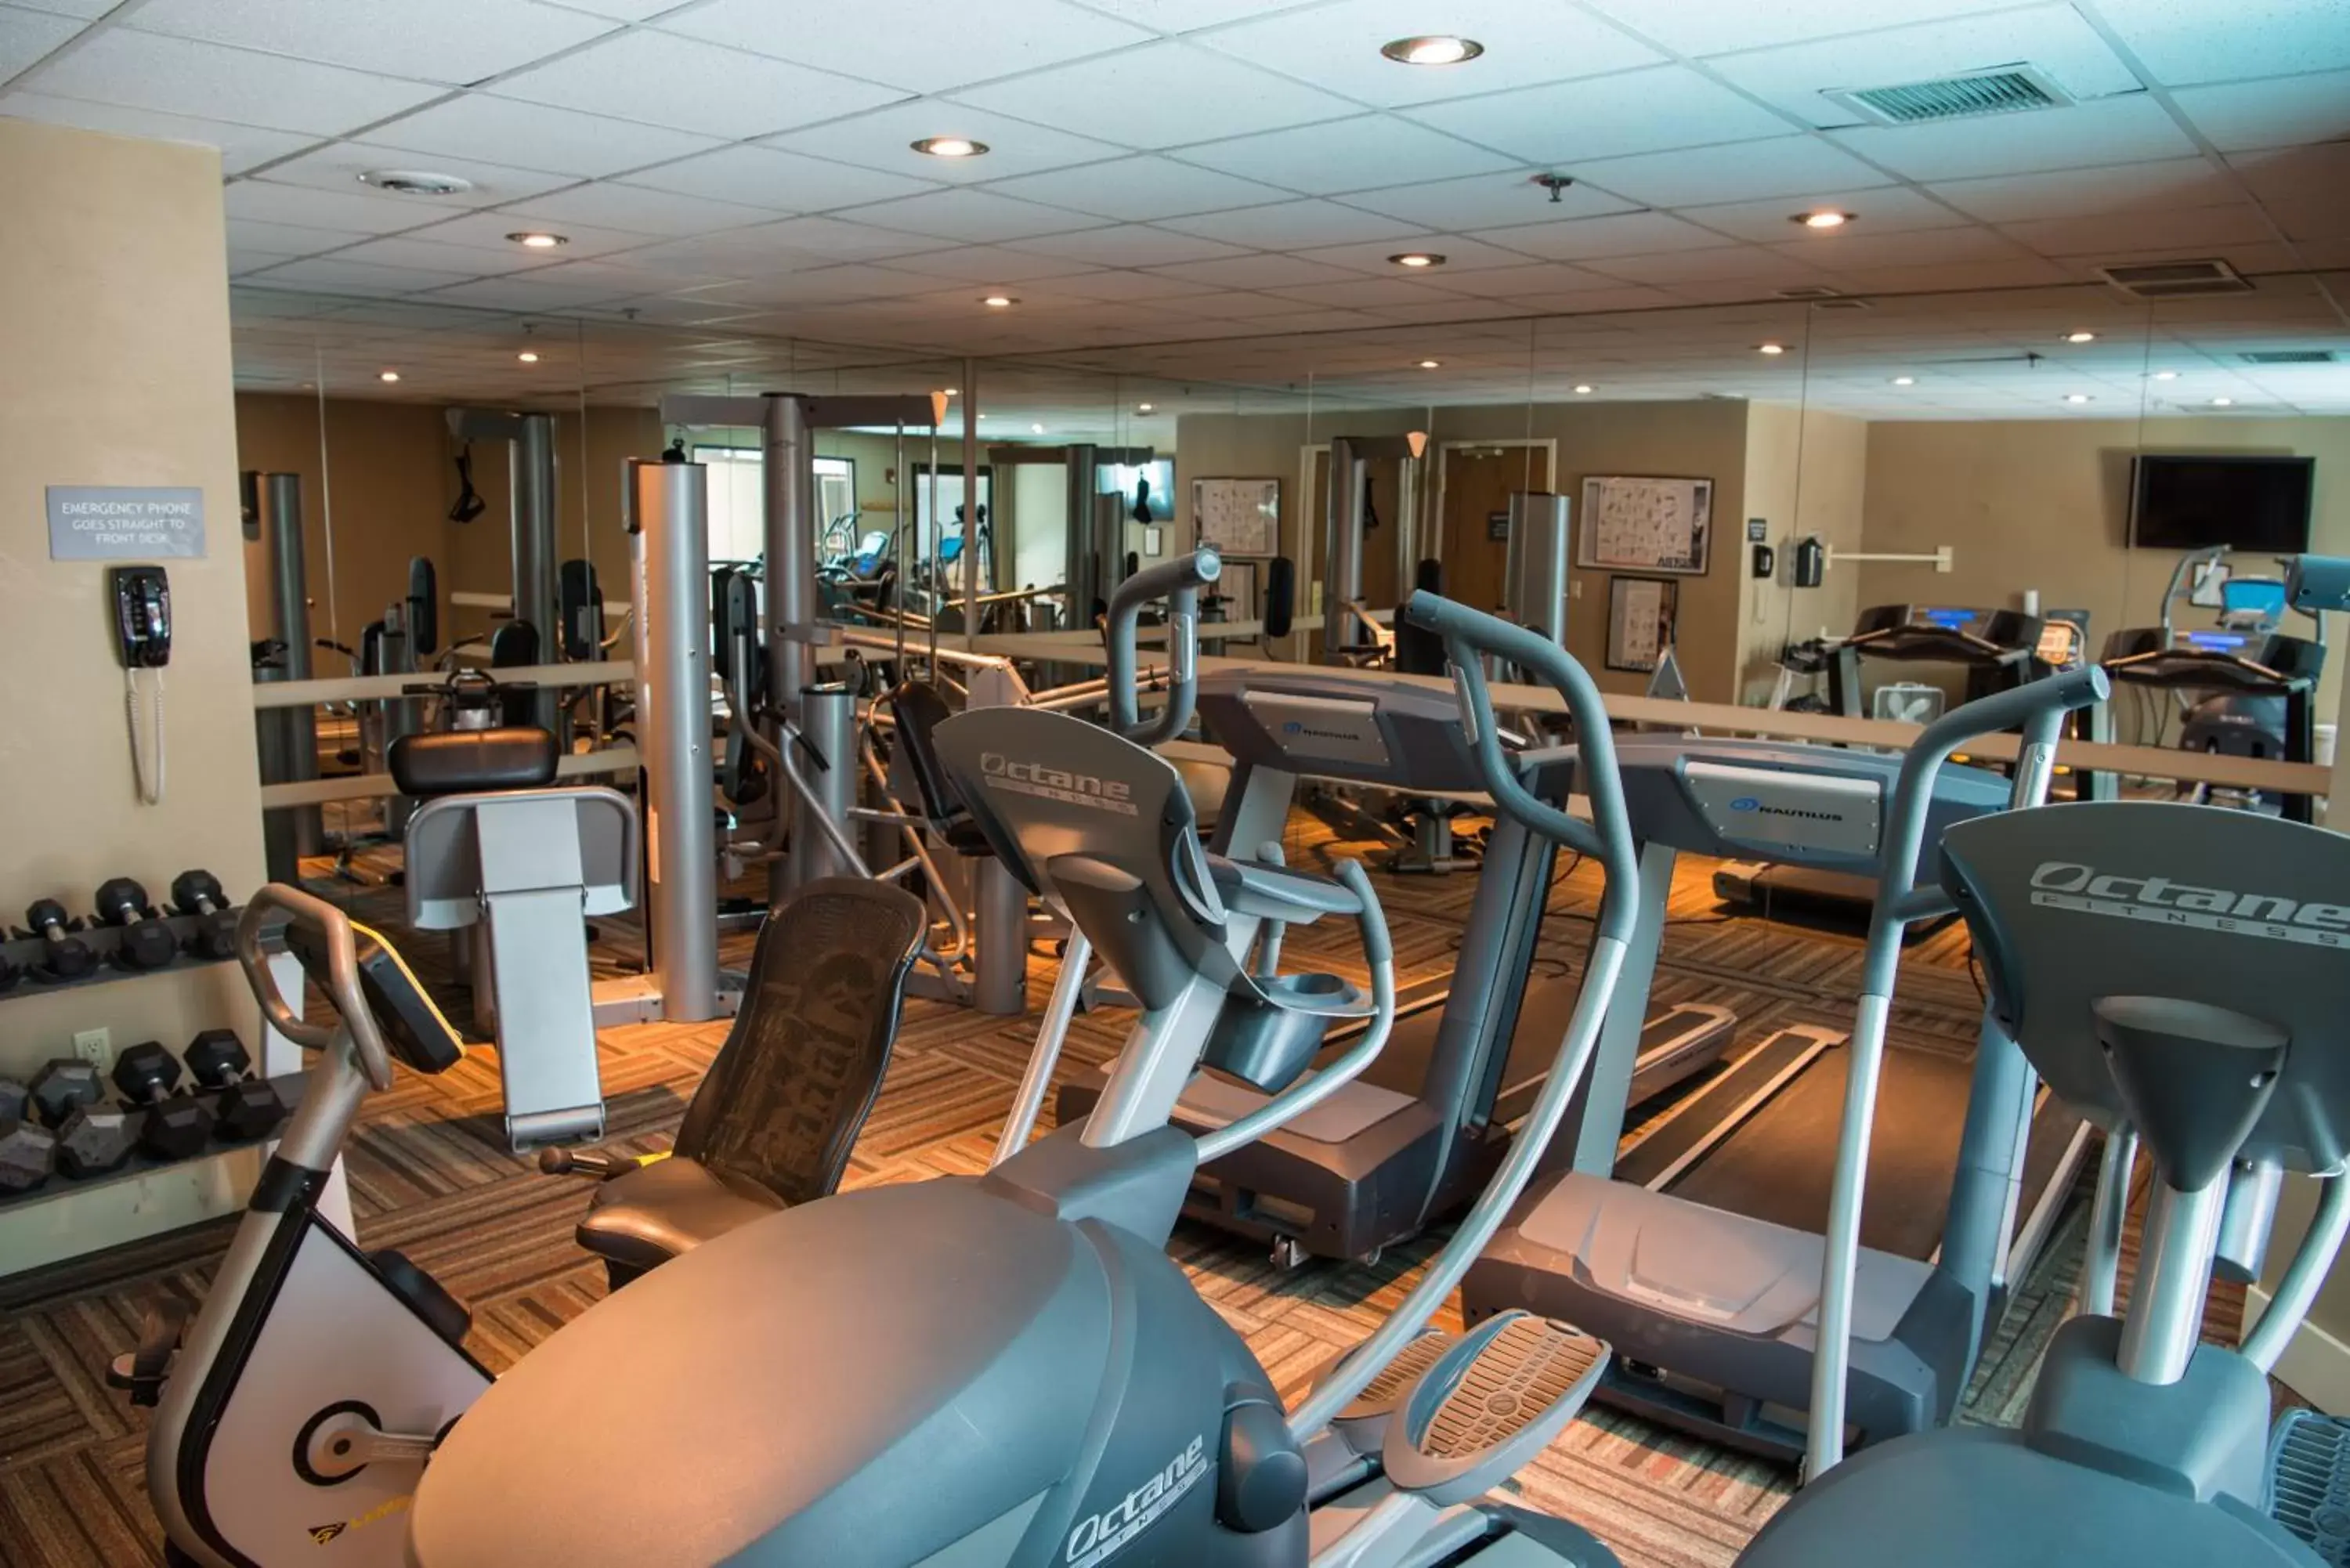 Fitness centre/facilities, Fitness Center/Facilities in The Grand Lodge Hotel and Suites